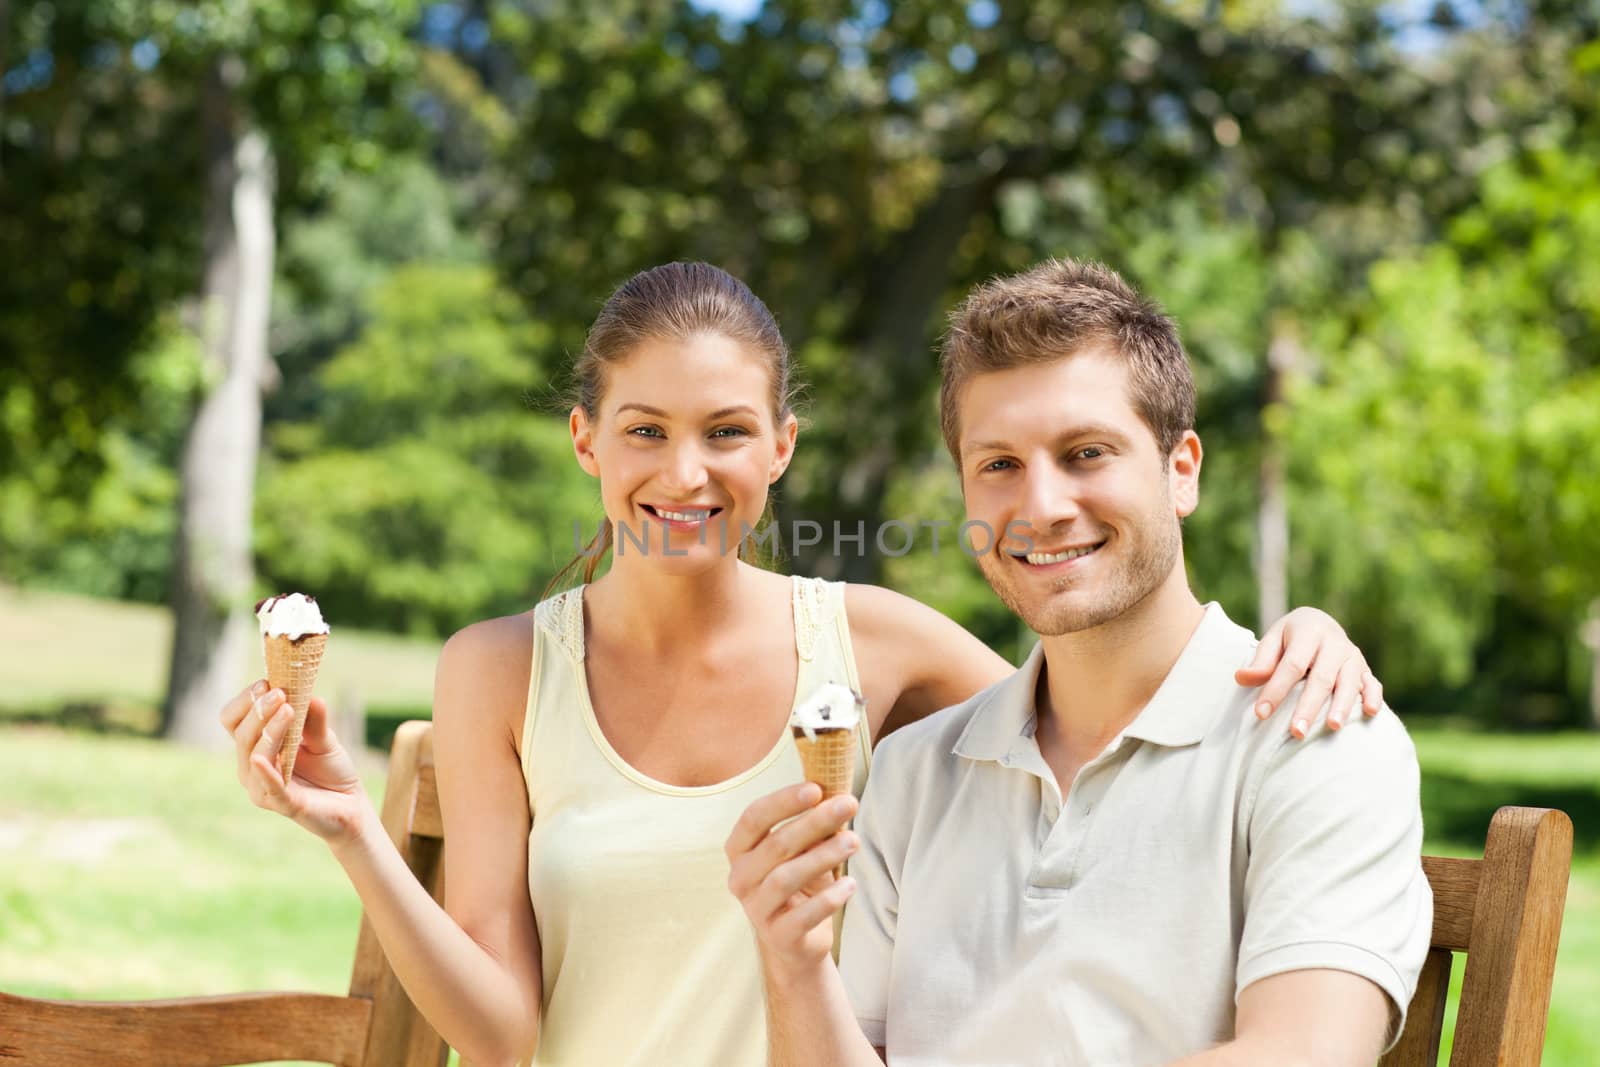 Couple eating an ice cream in the park during the summer